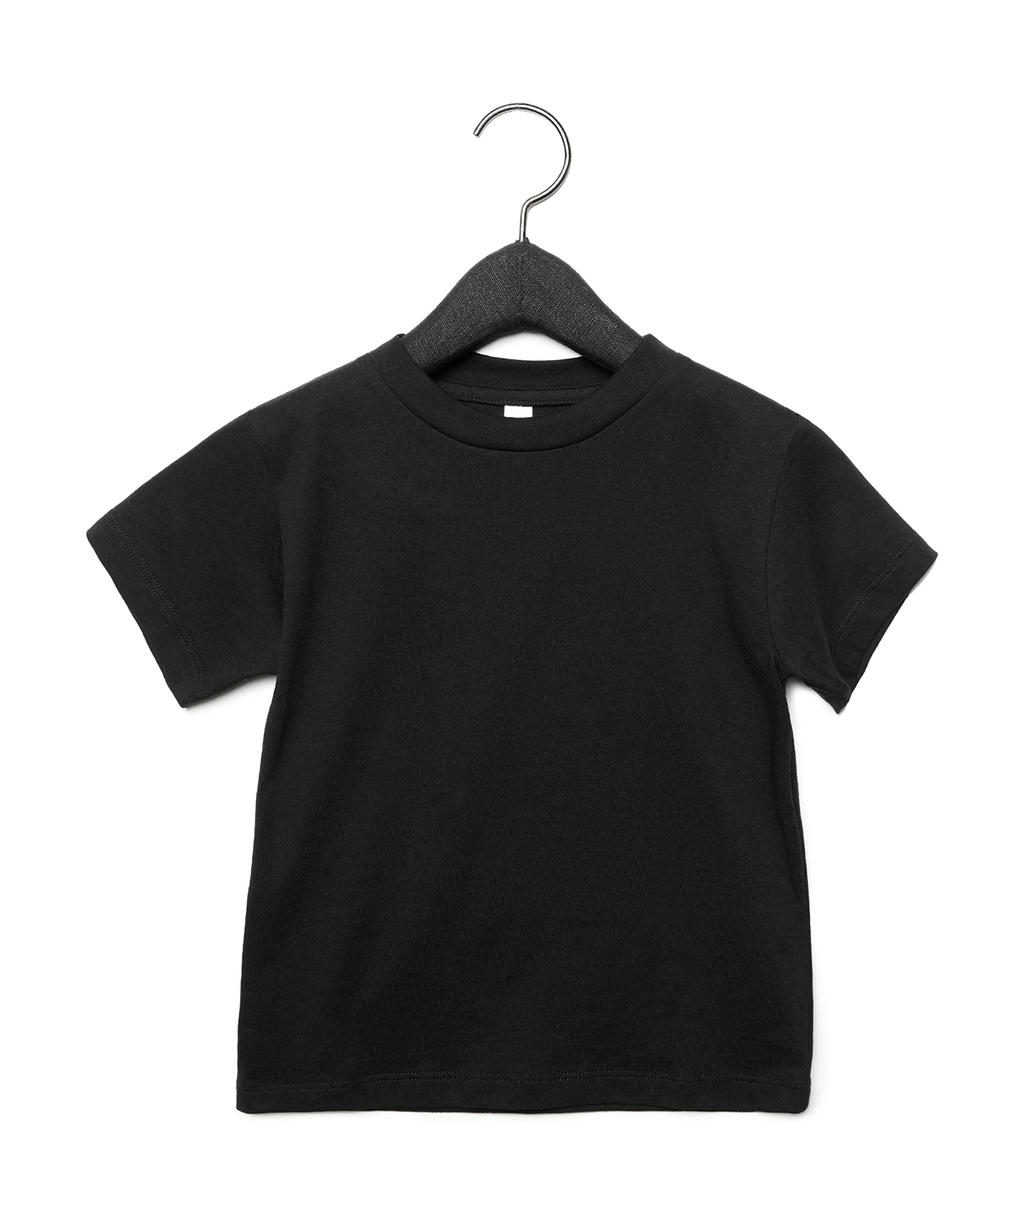  Toddler Jersey Short Sleeve Tee in Farbe Black